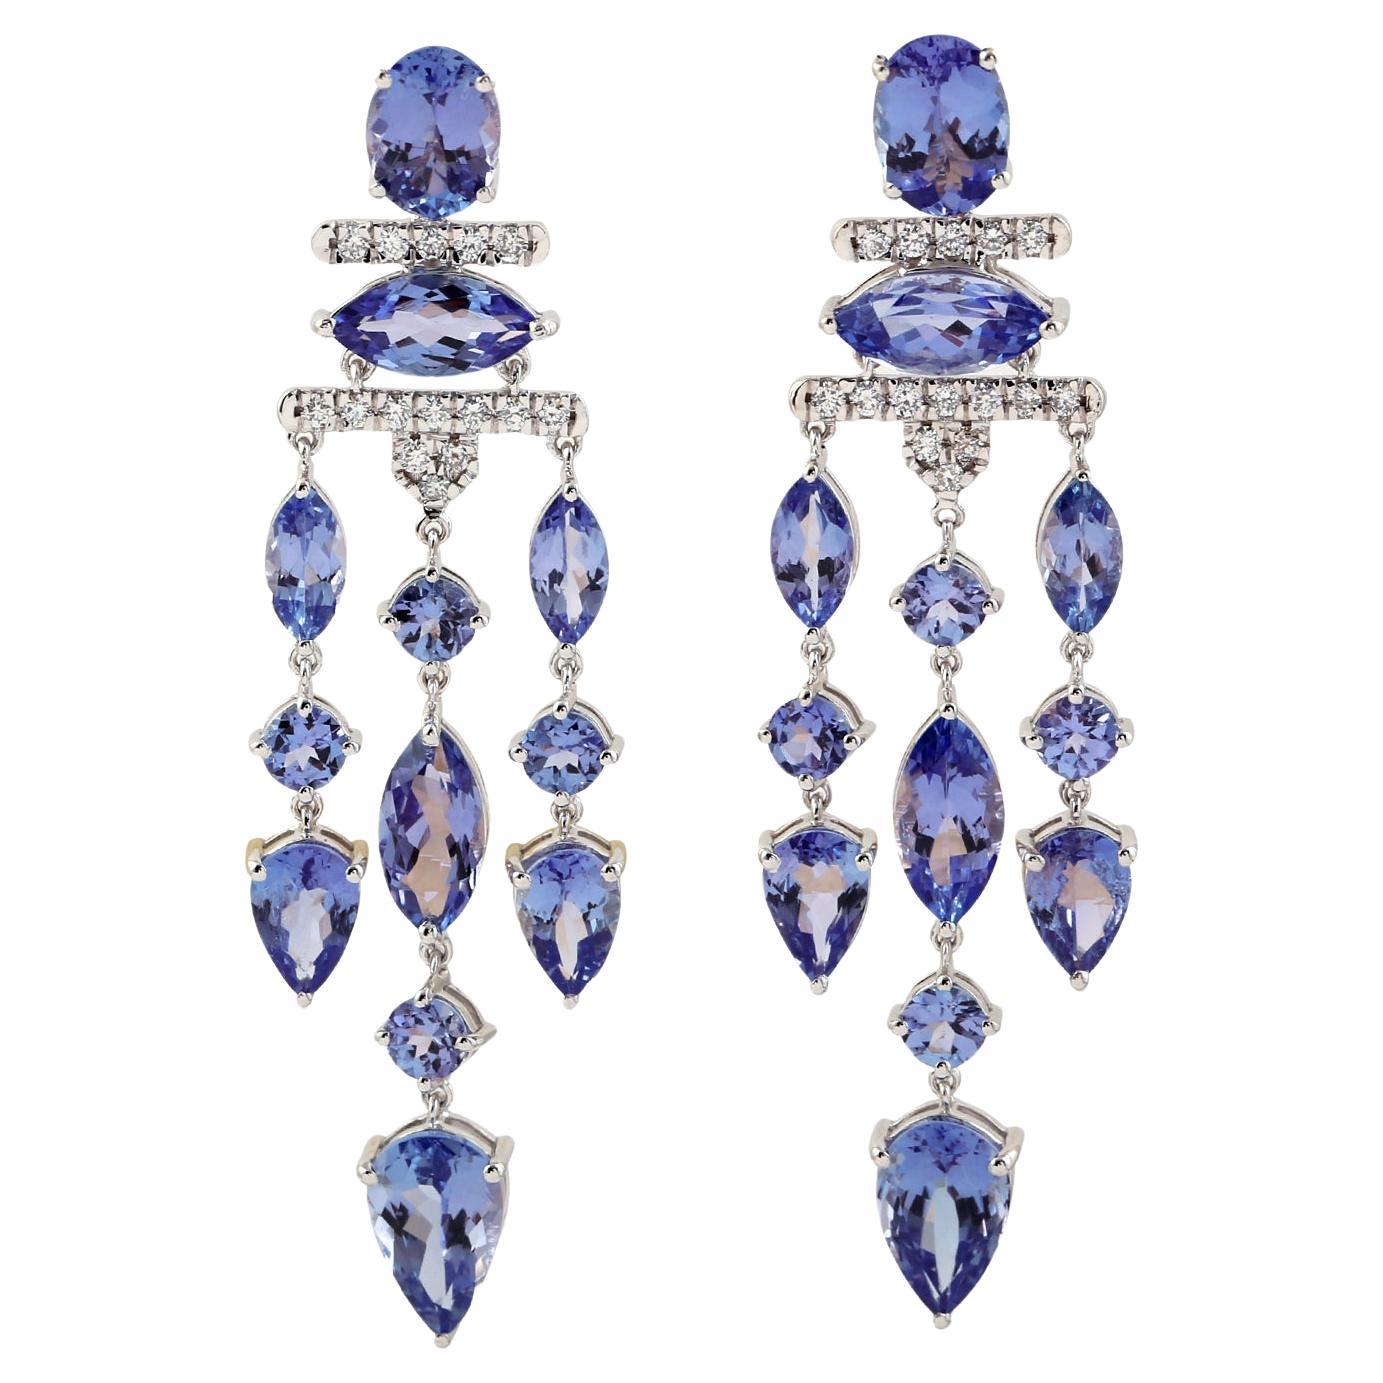 Multishaped Tanzanite Waterfall Earrings With Diamonds Made In 18k Gold